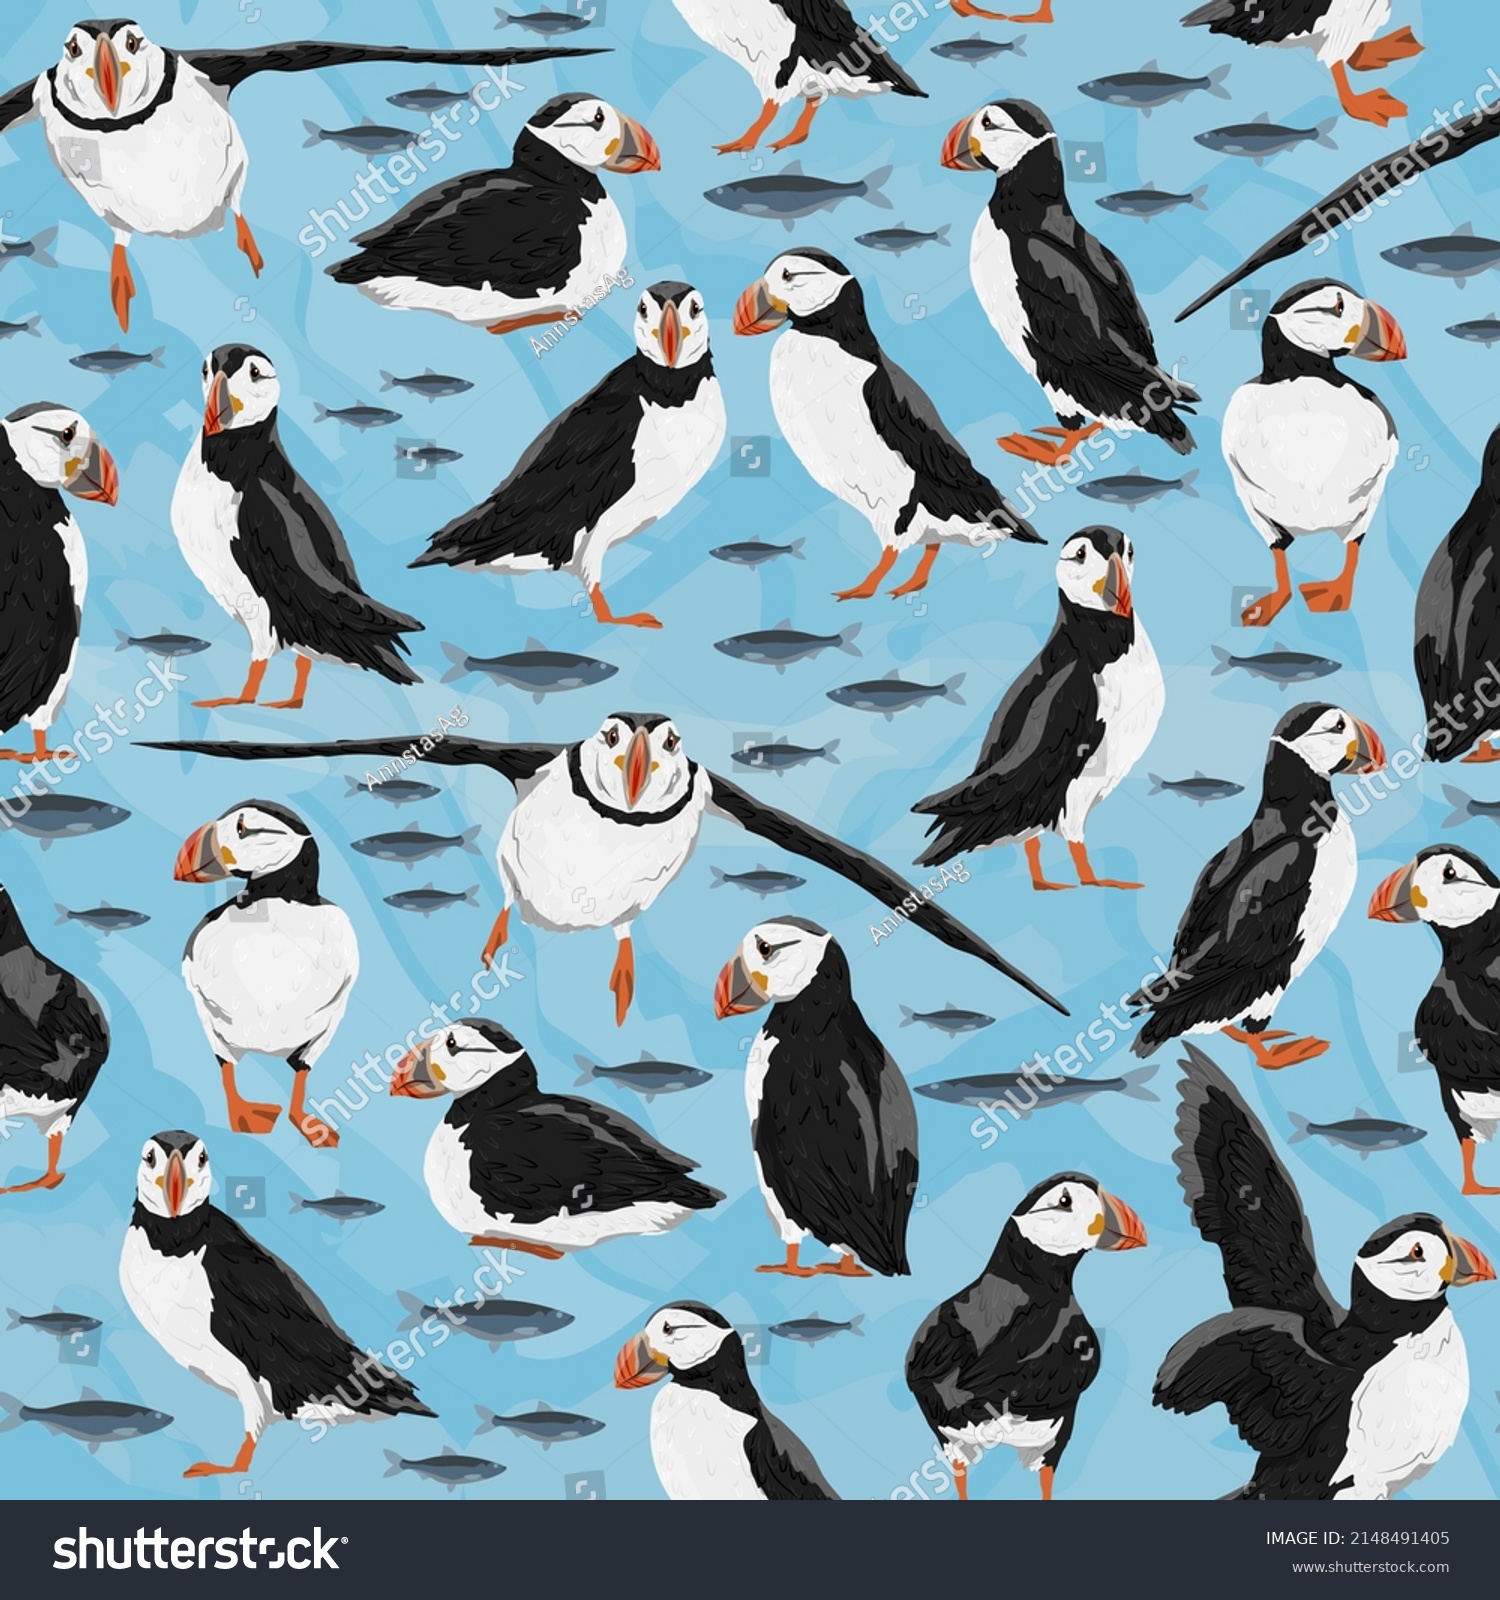 SVG of Seamless pattern with Atlantic puffin. Realistic Fratercula arctica or common puffin birds in different poses. vector birds svg